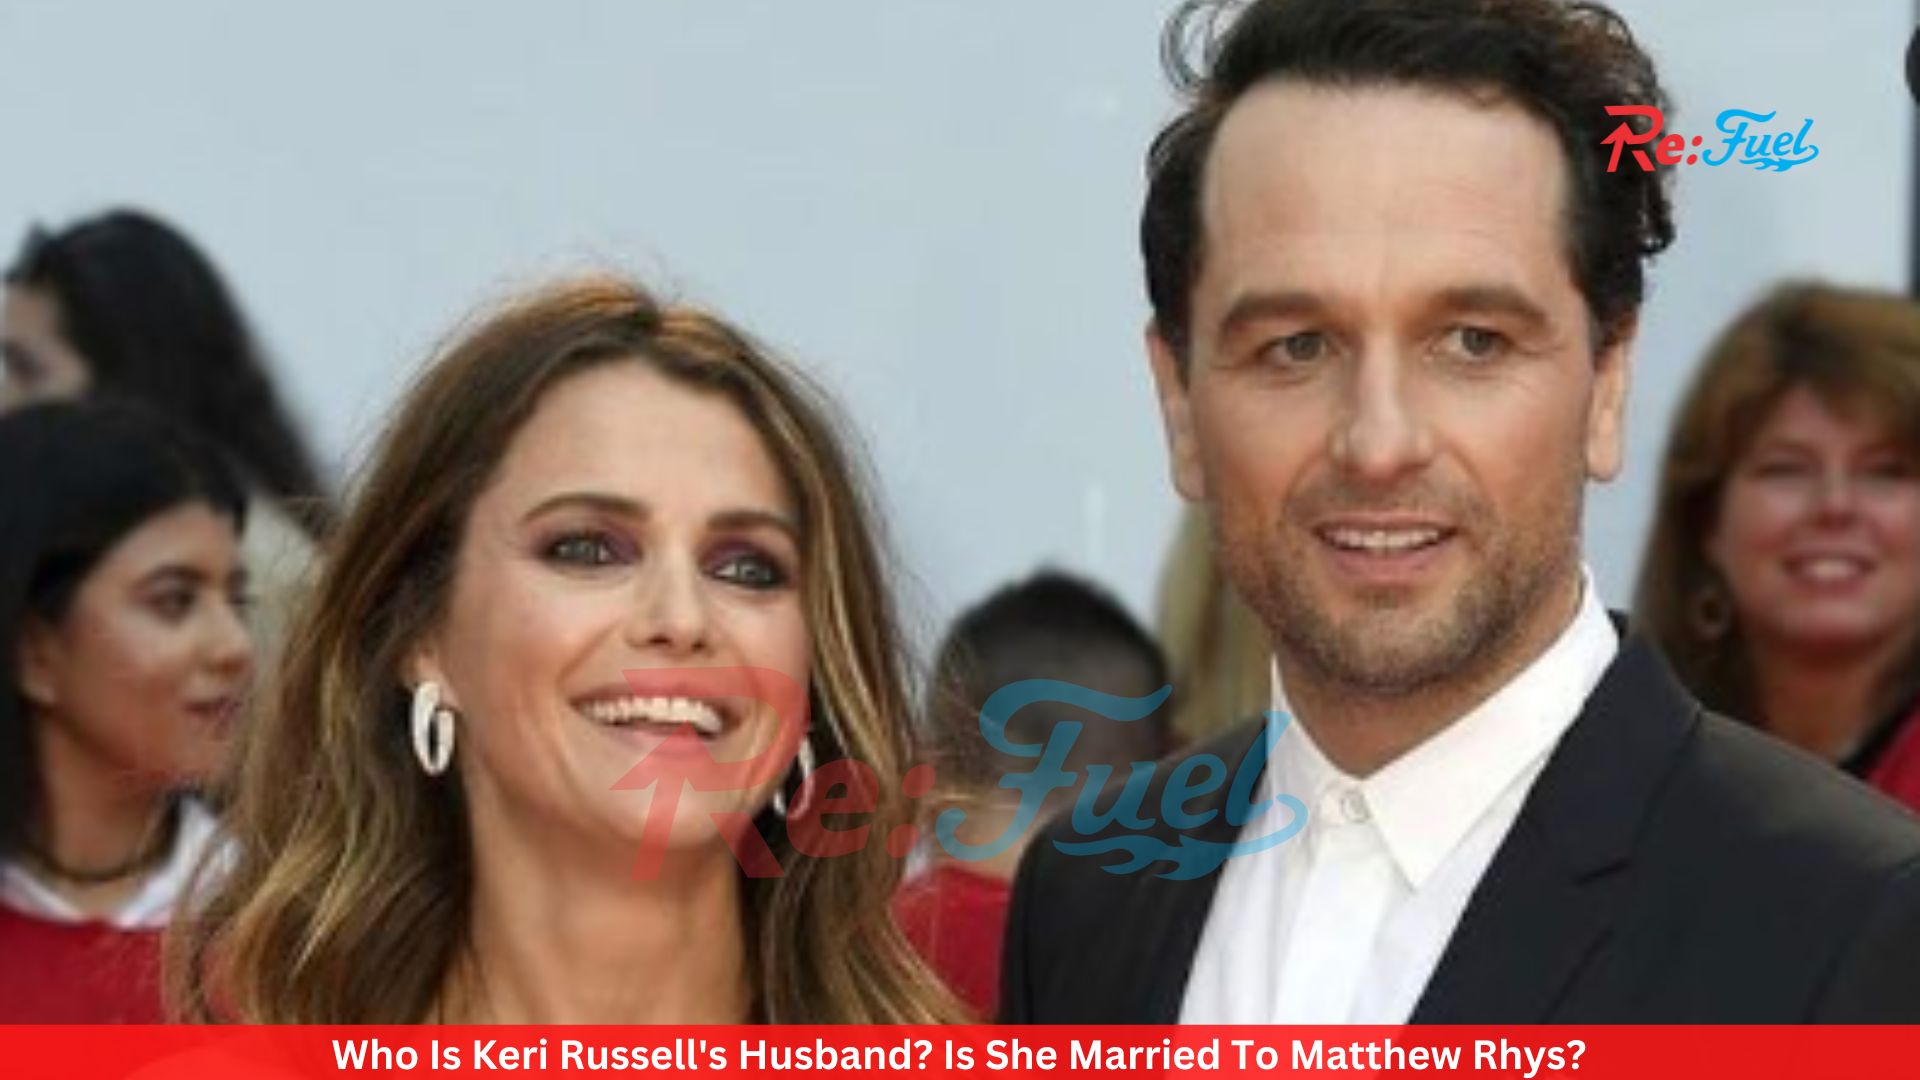 Who Is Keri Russell's Husband? Is She Married To Matthew Rhys?